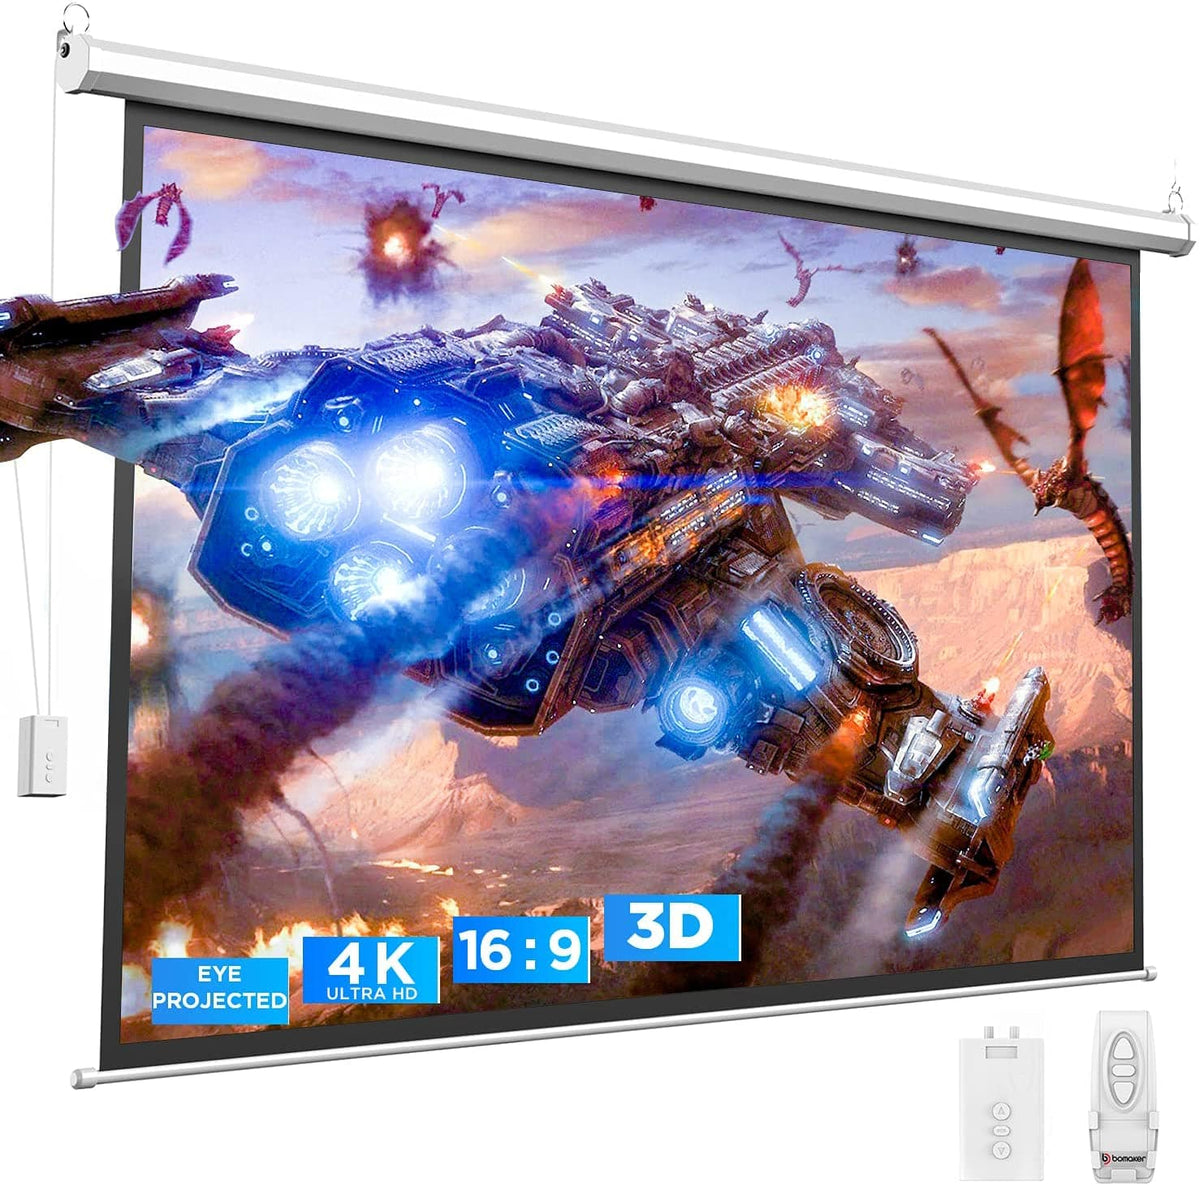 BOMAKER 4K HD Motorized Projector Screen, Eyes Protected, 3D Projection Screen 100&#39;&#39;, 16:9【Only US Available】 - Bomaker